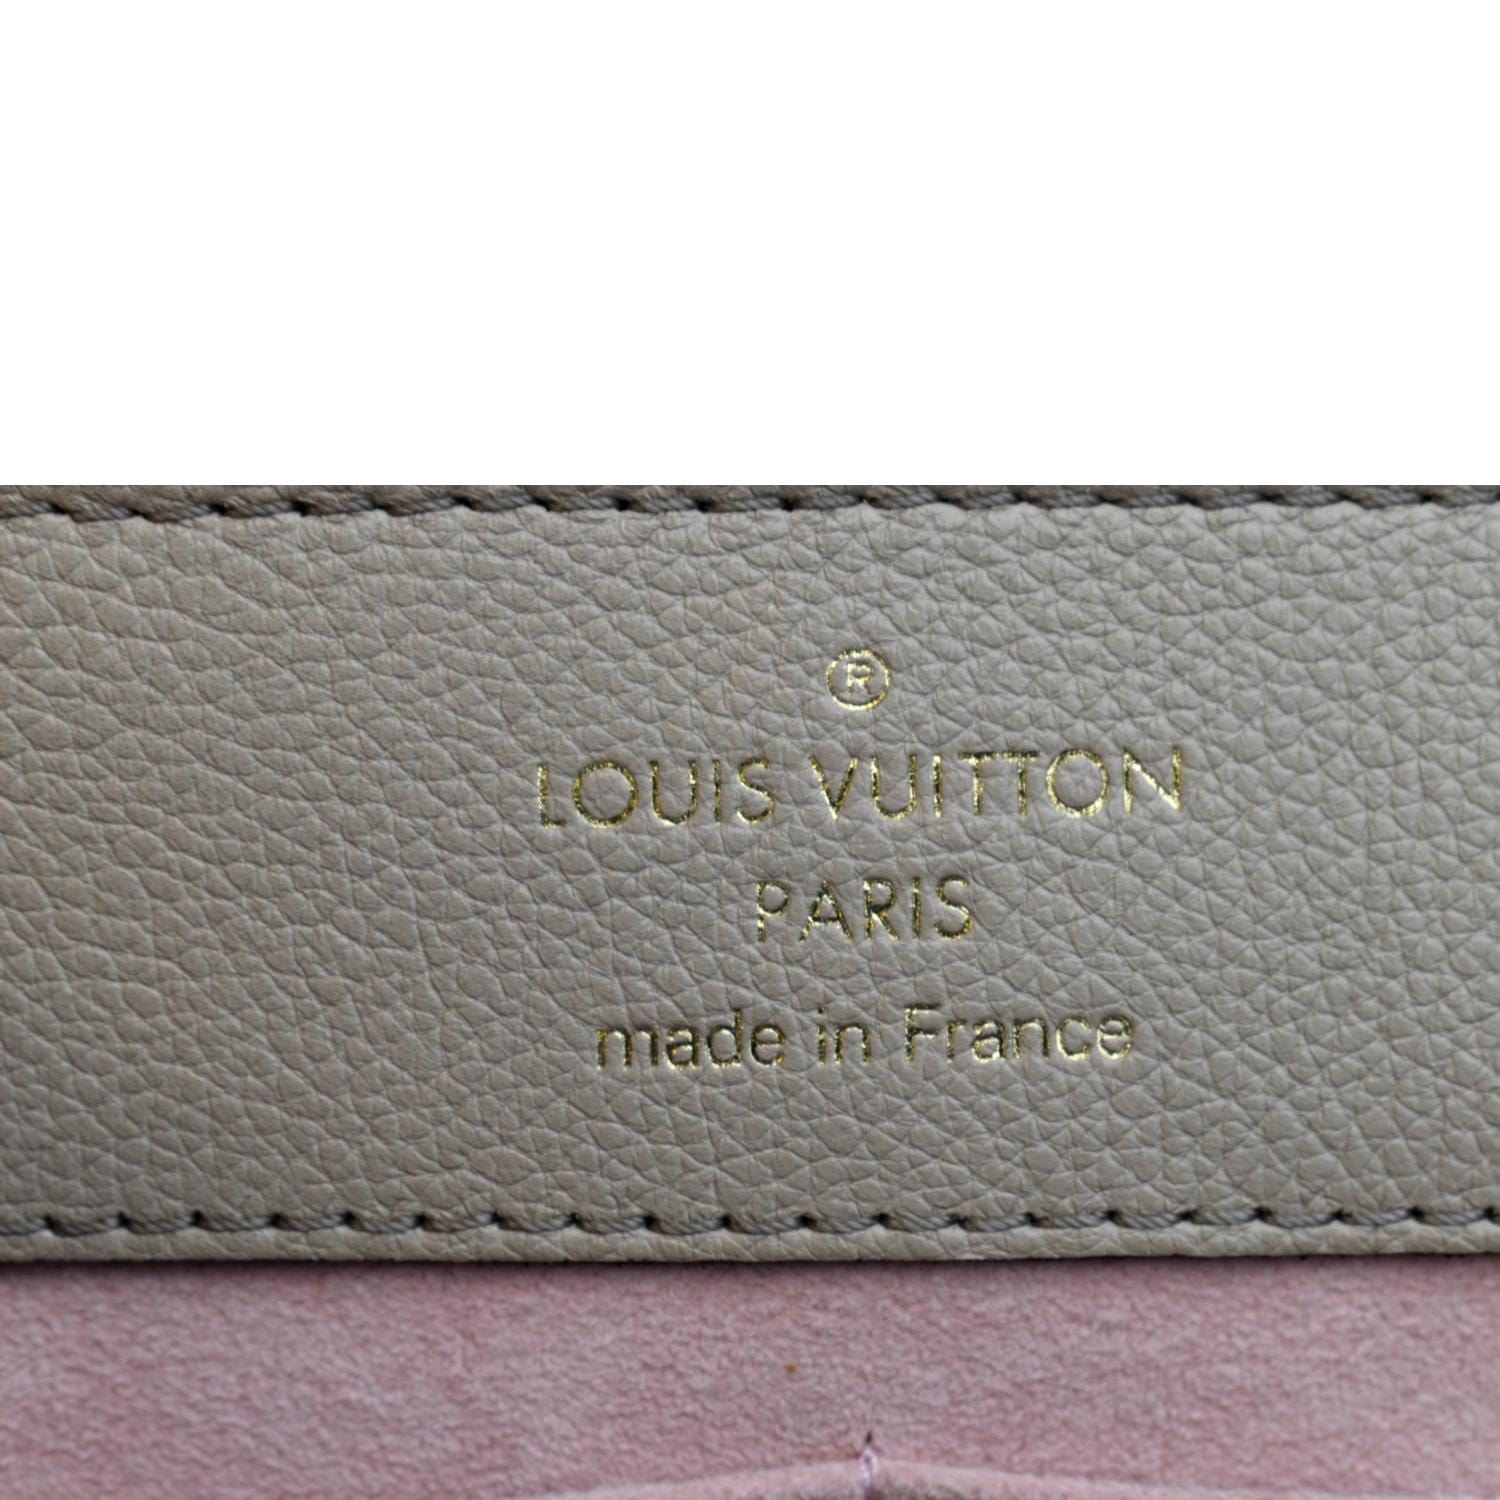 Louis Vuitton Lockme Ever Bag - For Sale on 1stDibs  louis vuitton lock me  bag, lv lockme bag, lv lockme ever mm